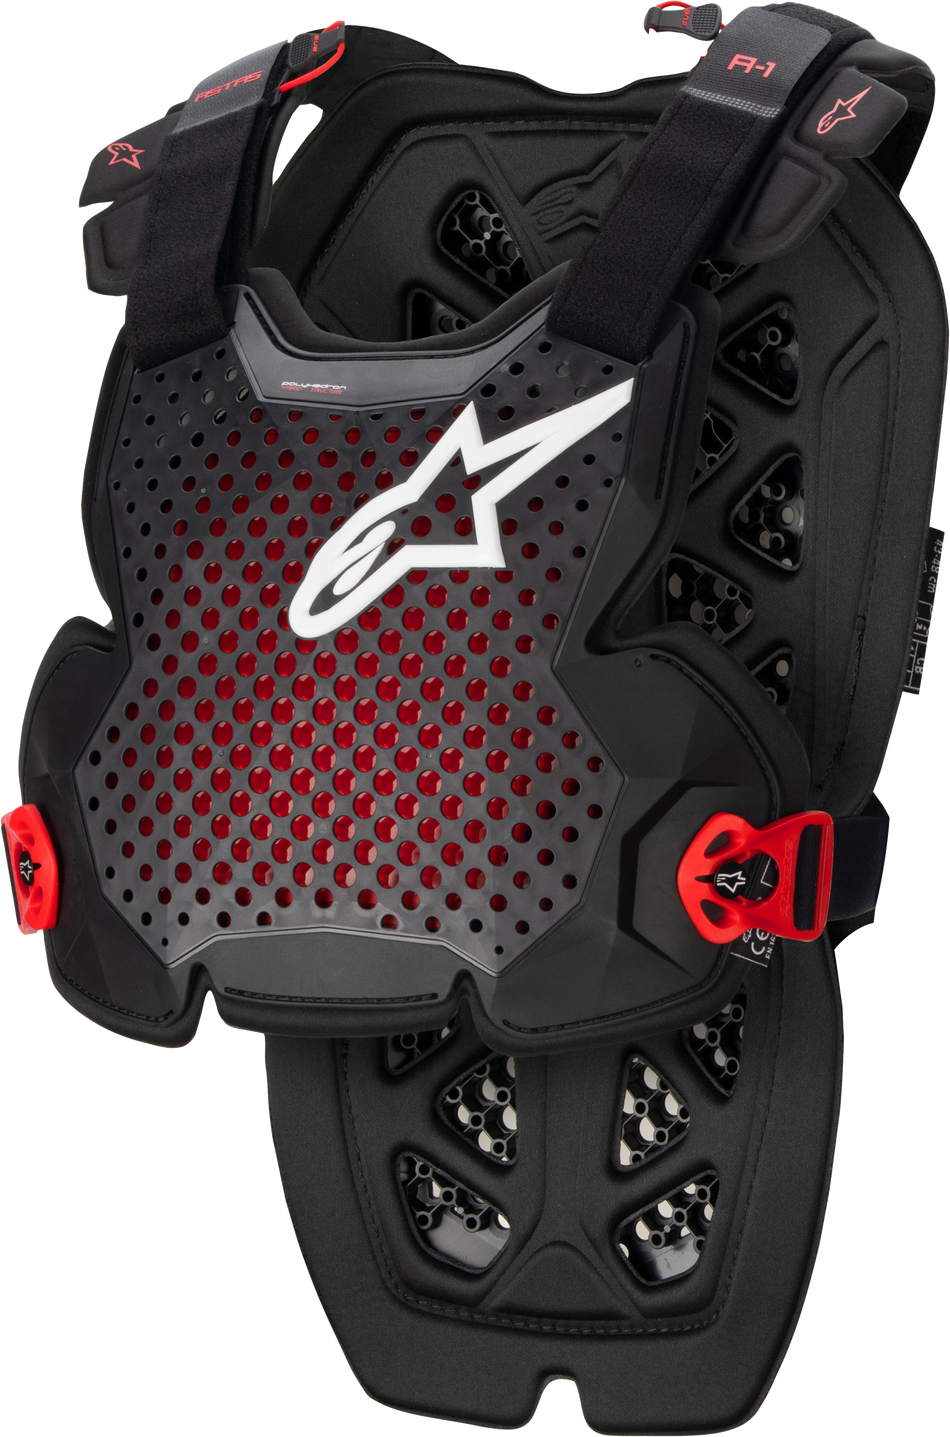 ALPINESTARS A-1 Chest Protector Anthracite/Black/Red  Md/Lg 6700123-1431-M/L